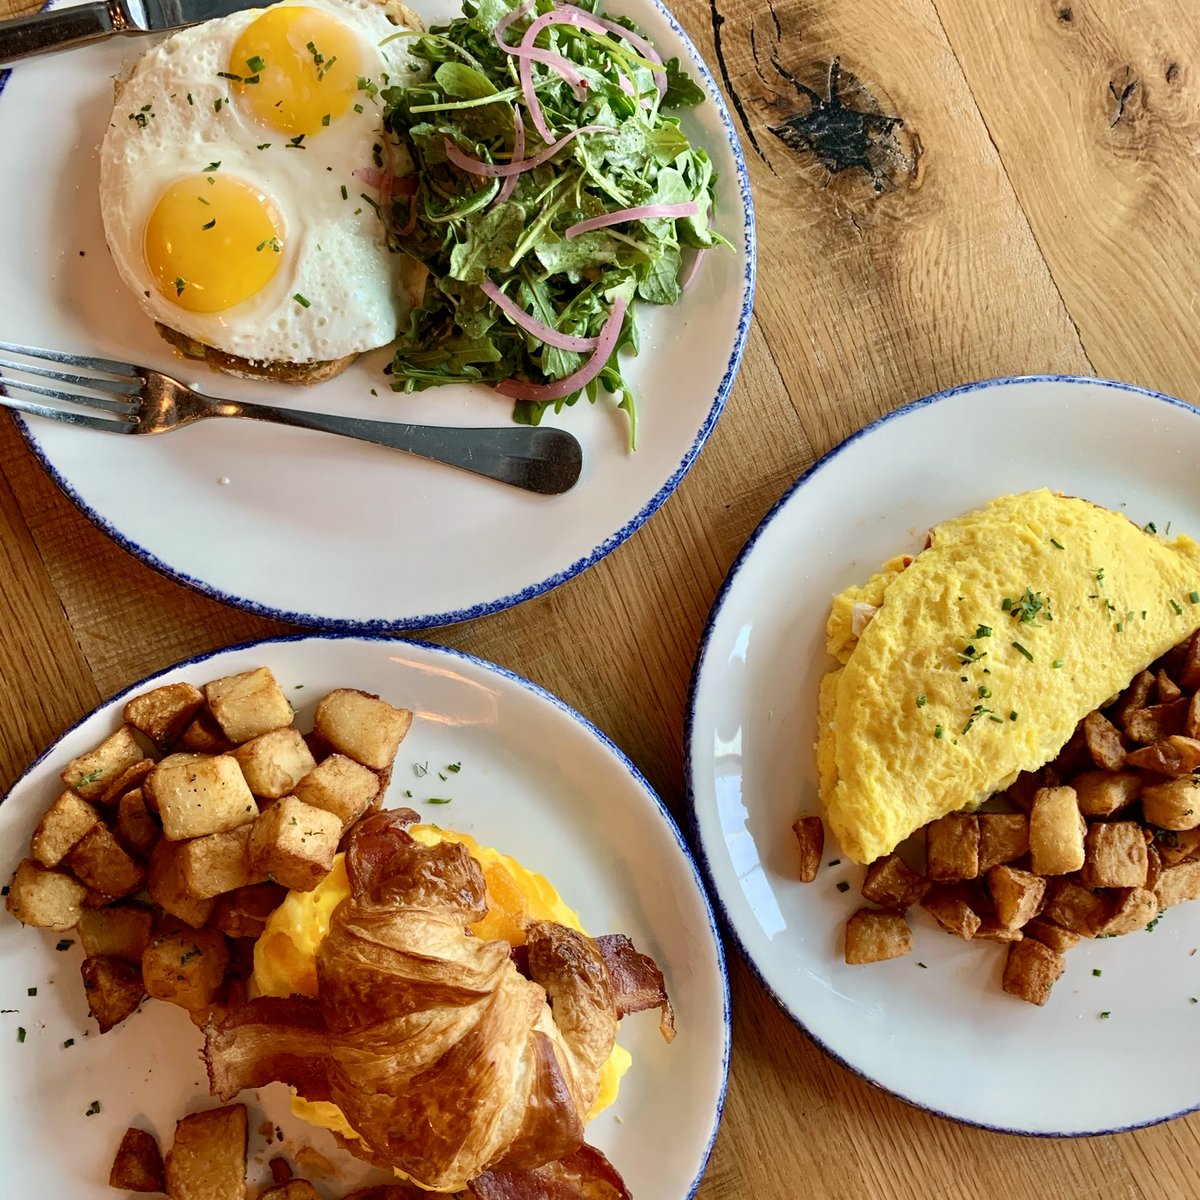 Chicago is feasting on bites and beats as Lollapalooza takes the city by storm! 🎵 Re-charge with us tomorrow and Sunday before dancing the night away with a tasty brunch and 1.5 hours of unlimited mimosas! 🍊🍾
•
#Lollapalooza #Lolla #EEEEEats #infatuationchi #eaterchicago